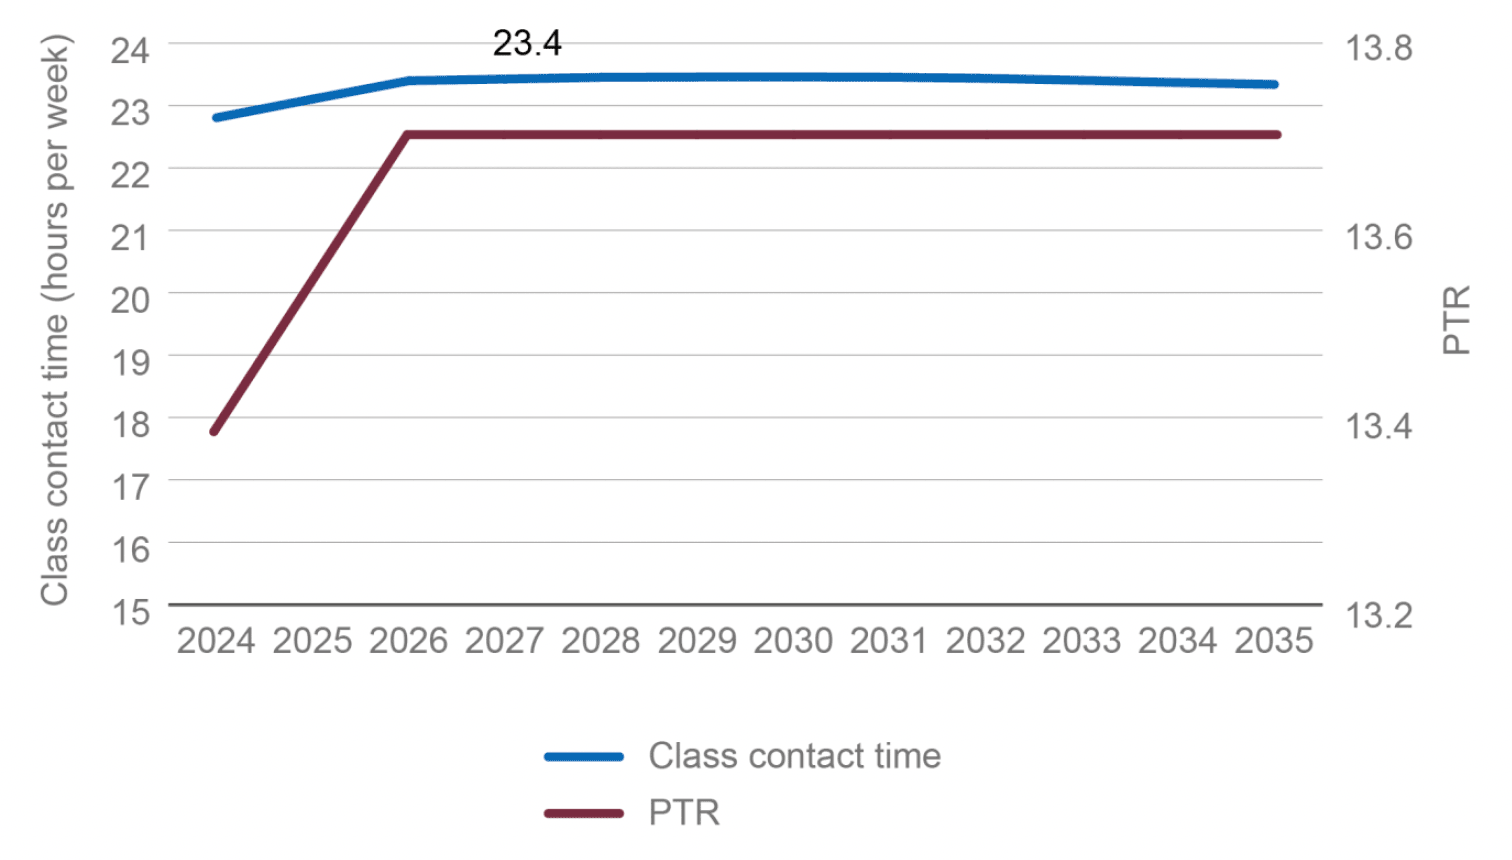 Line plots showing how the increase in PTR is accompanied by an increase in class contact time from 22.5 to 23.4 in 2026.